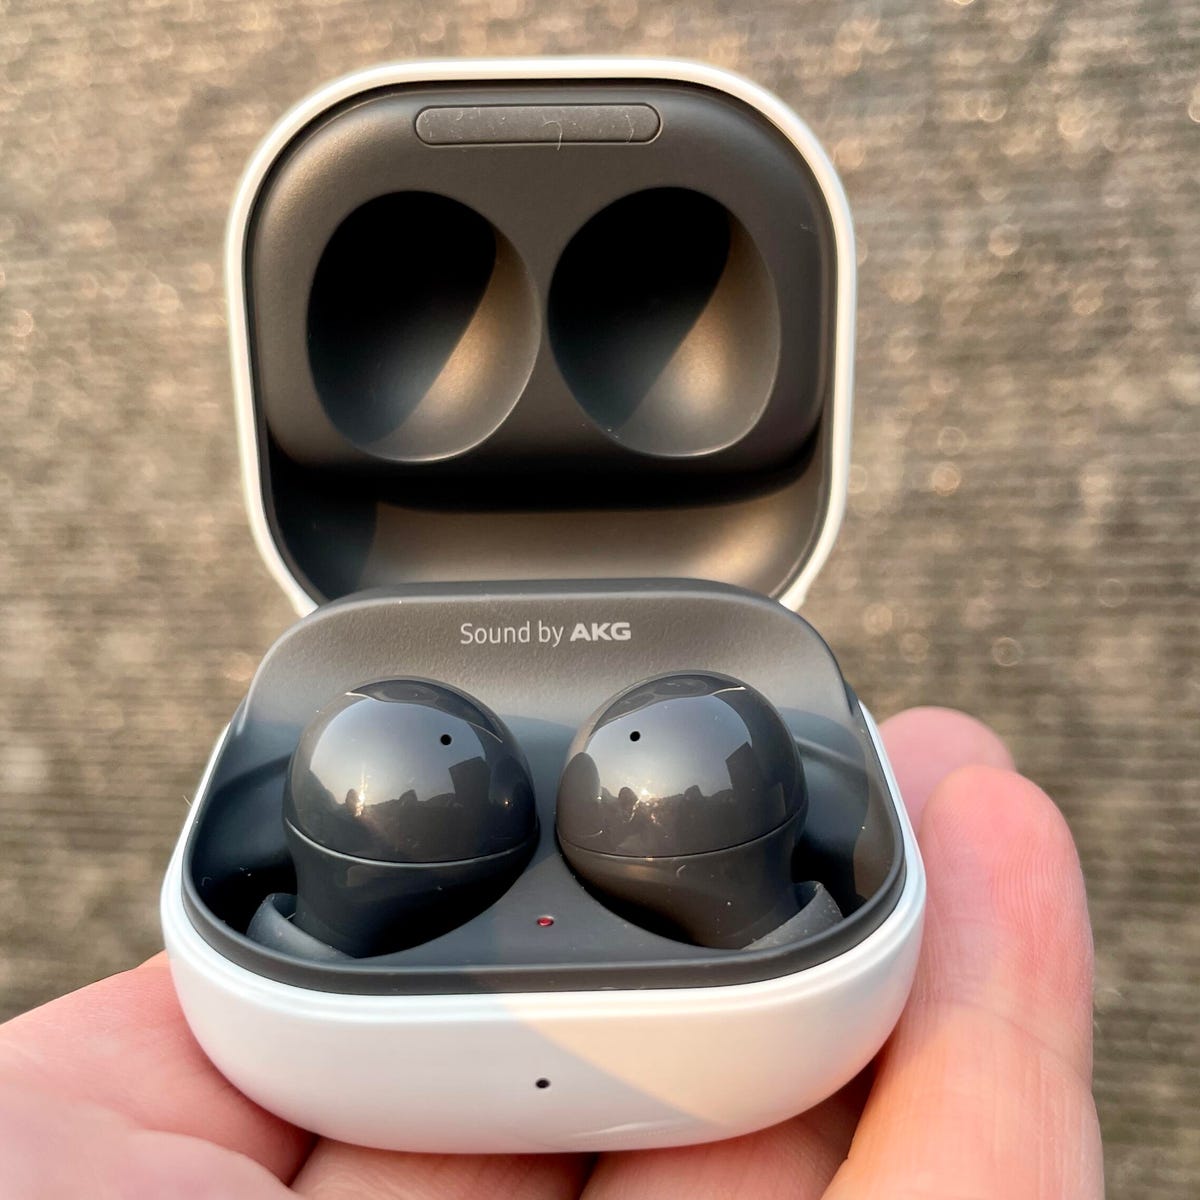 Samsung earbuds CNET its - Buds Galaxy 2 review: wireless shrinks